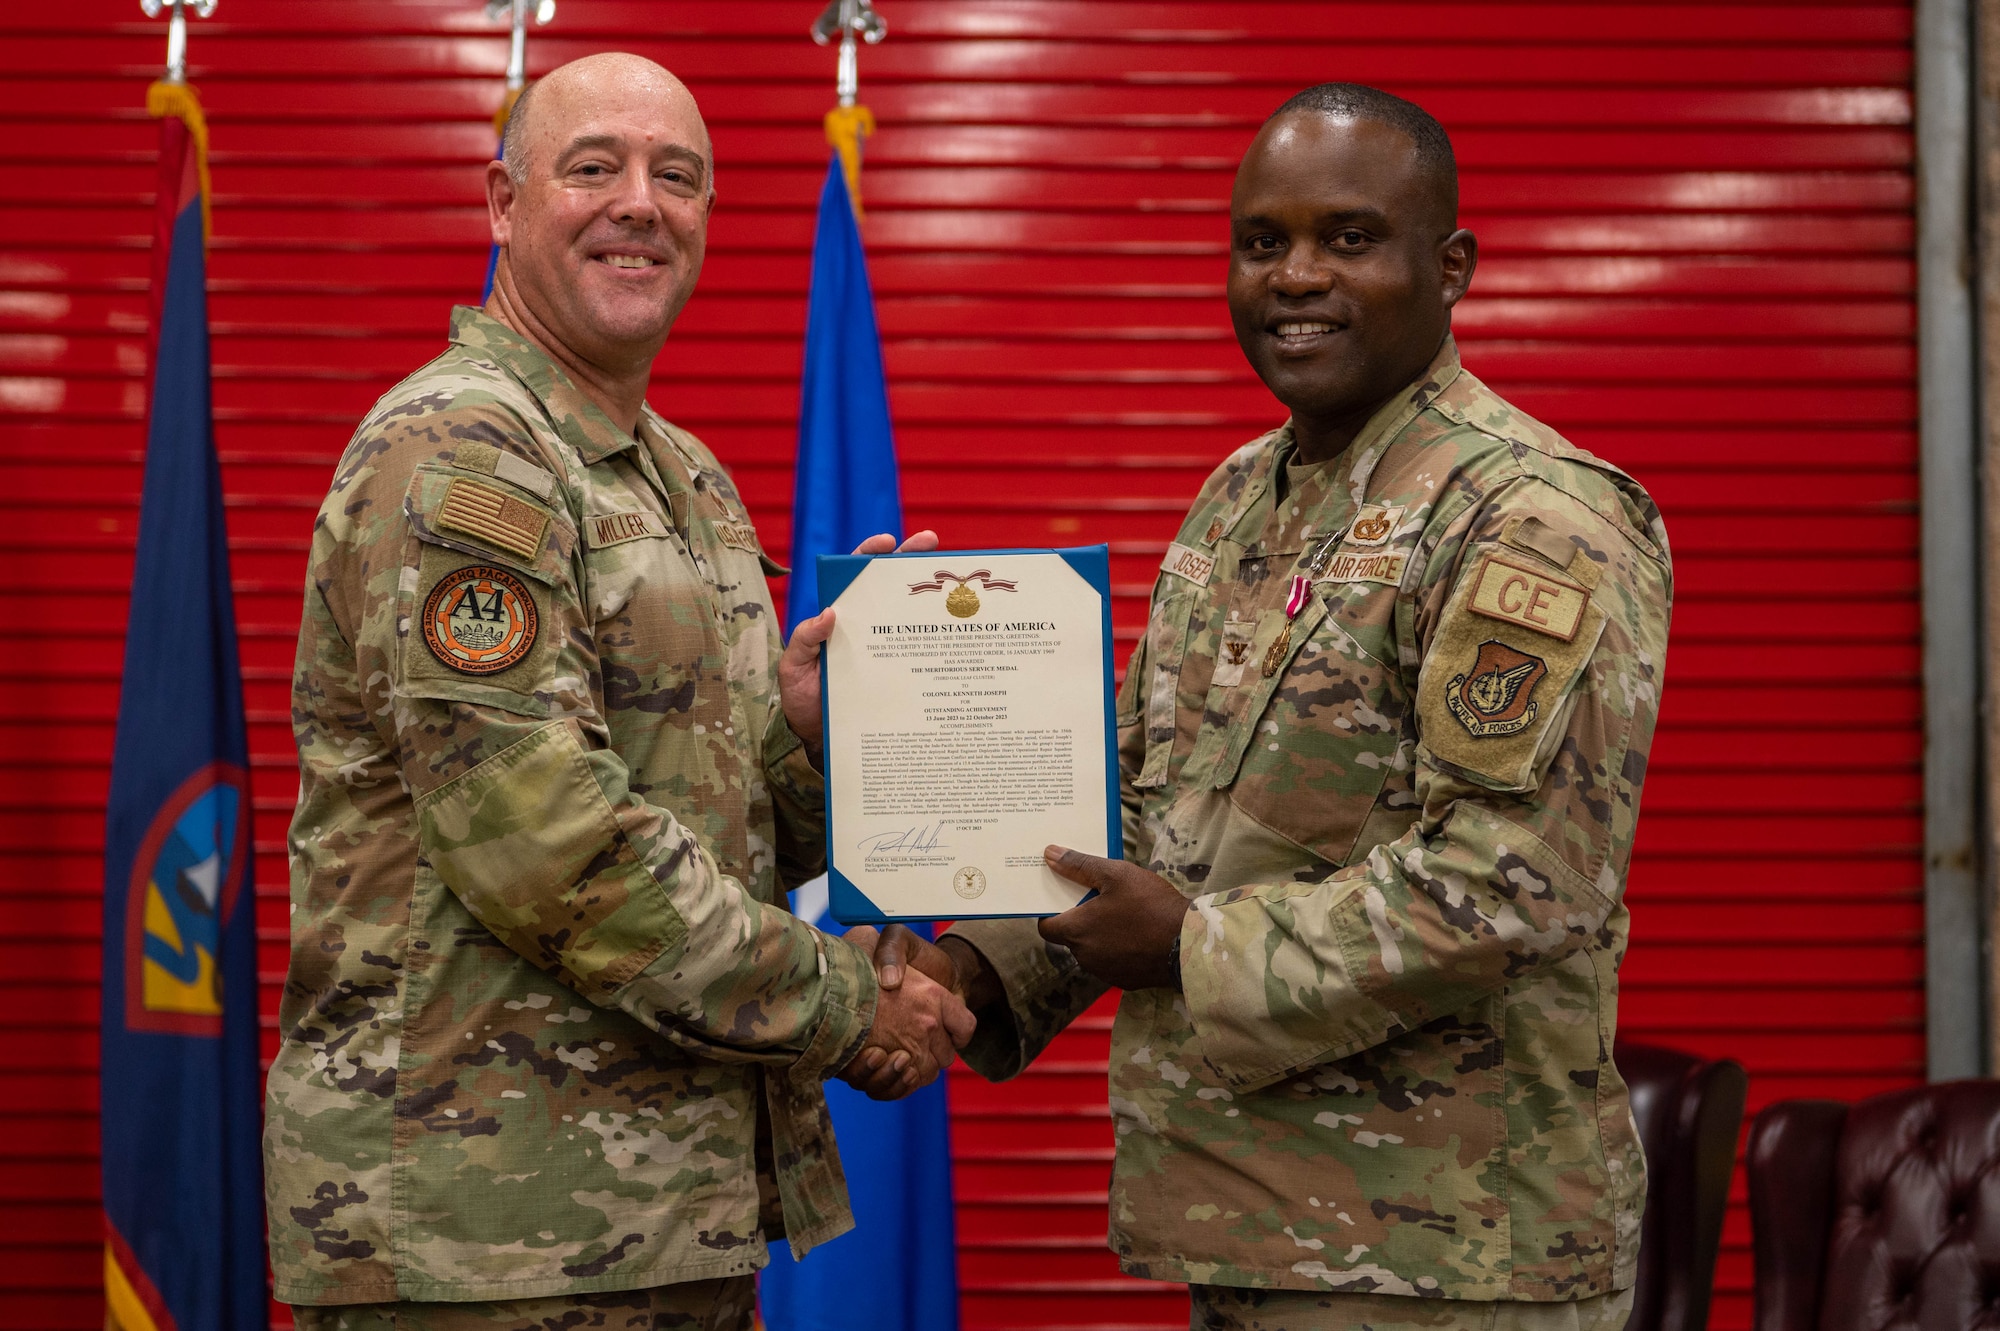 U.S. Air Force Col. Kenneth Joseph, outgoing commander of the 356th Expeditionary Civil Engineer Group, receives an award from Brig. Gen. Patrick G. Miller, director of logistics, engineering and force protection, headquarters Pacific Air Forces, Joint Base Pearl Harbor Hickam, Hawaii, at the Pacific Regional Training Center - Andersen, Guam, Oct. 20, 2023. Miller presided over the 356th ECEG change of command. (U.S. Air Force photo by Airman Allon Lapaix)